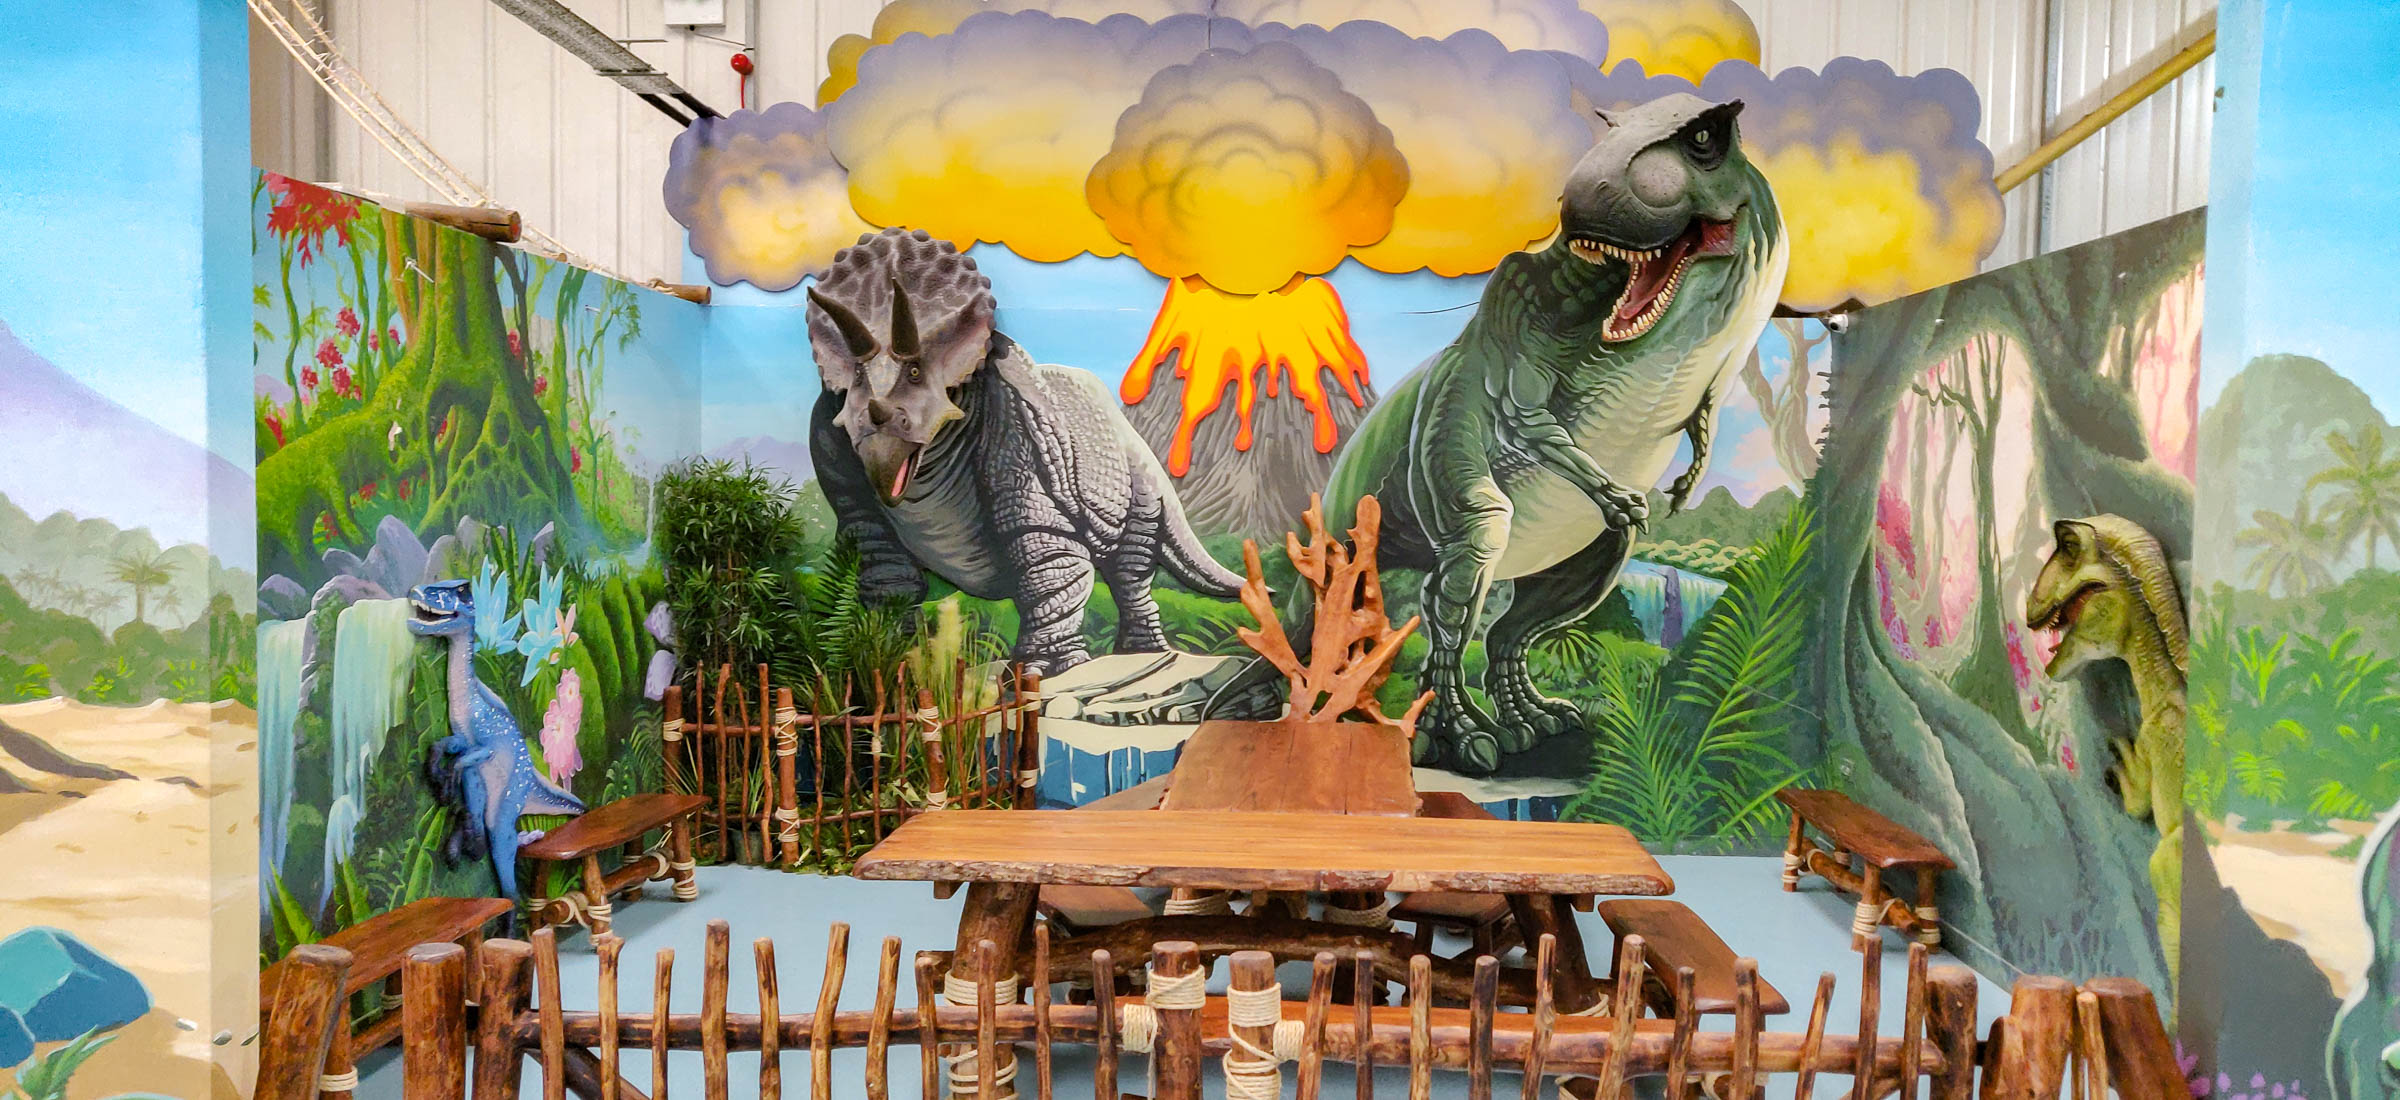 Dinosaur room centre piece for photo shoots with T-Rex and Triceratops, whose heads are real models, very large and life-like which are securely attached to the walls. My task was to paint in their bodies on the flat wall behind, and place them in a scene.